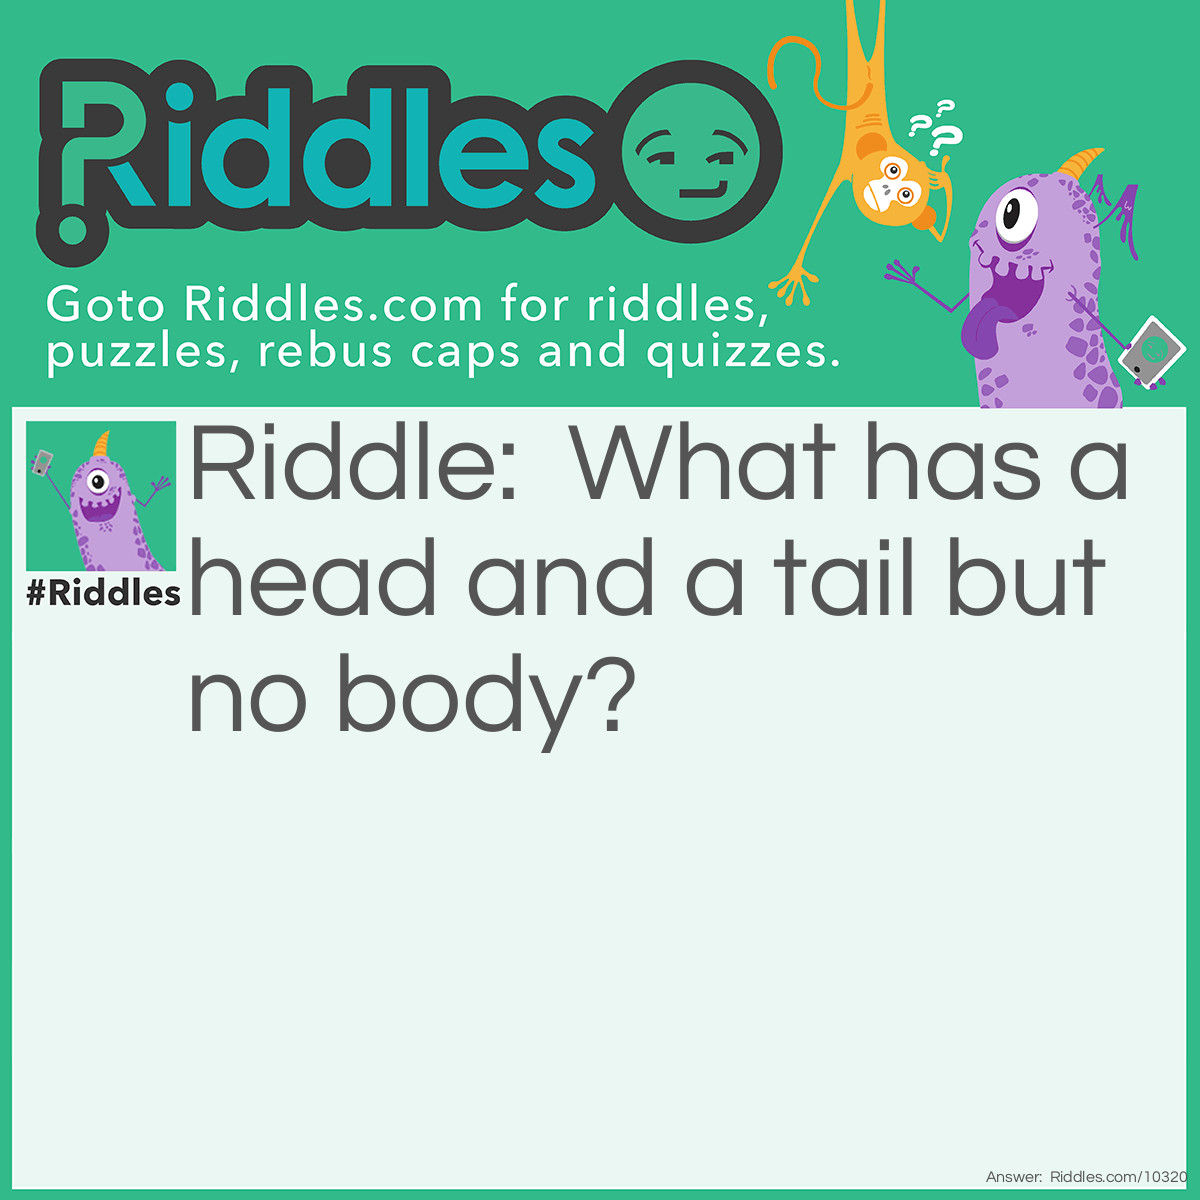 Riddle: What has a head and a tail but no body? Answer: A coin.